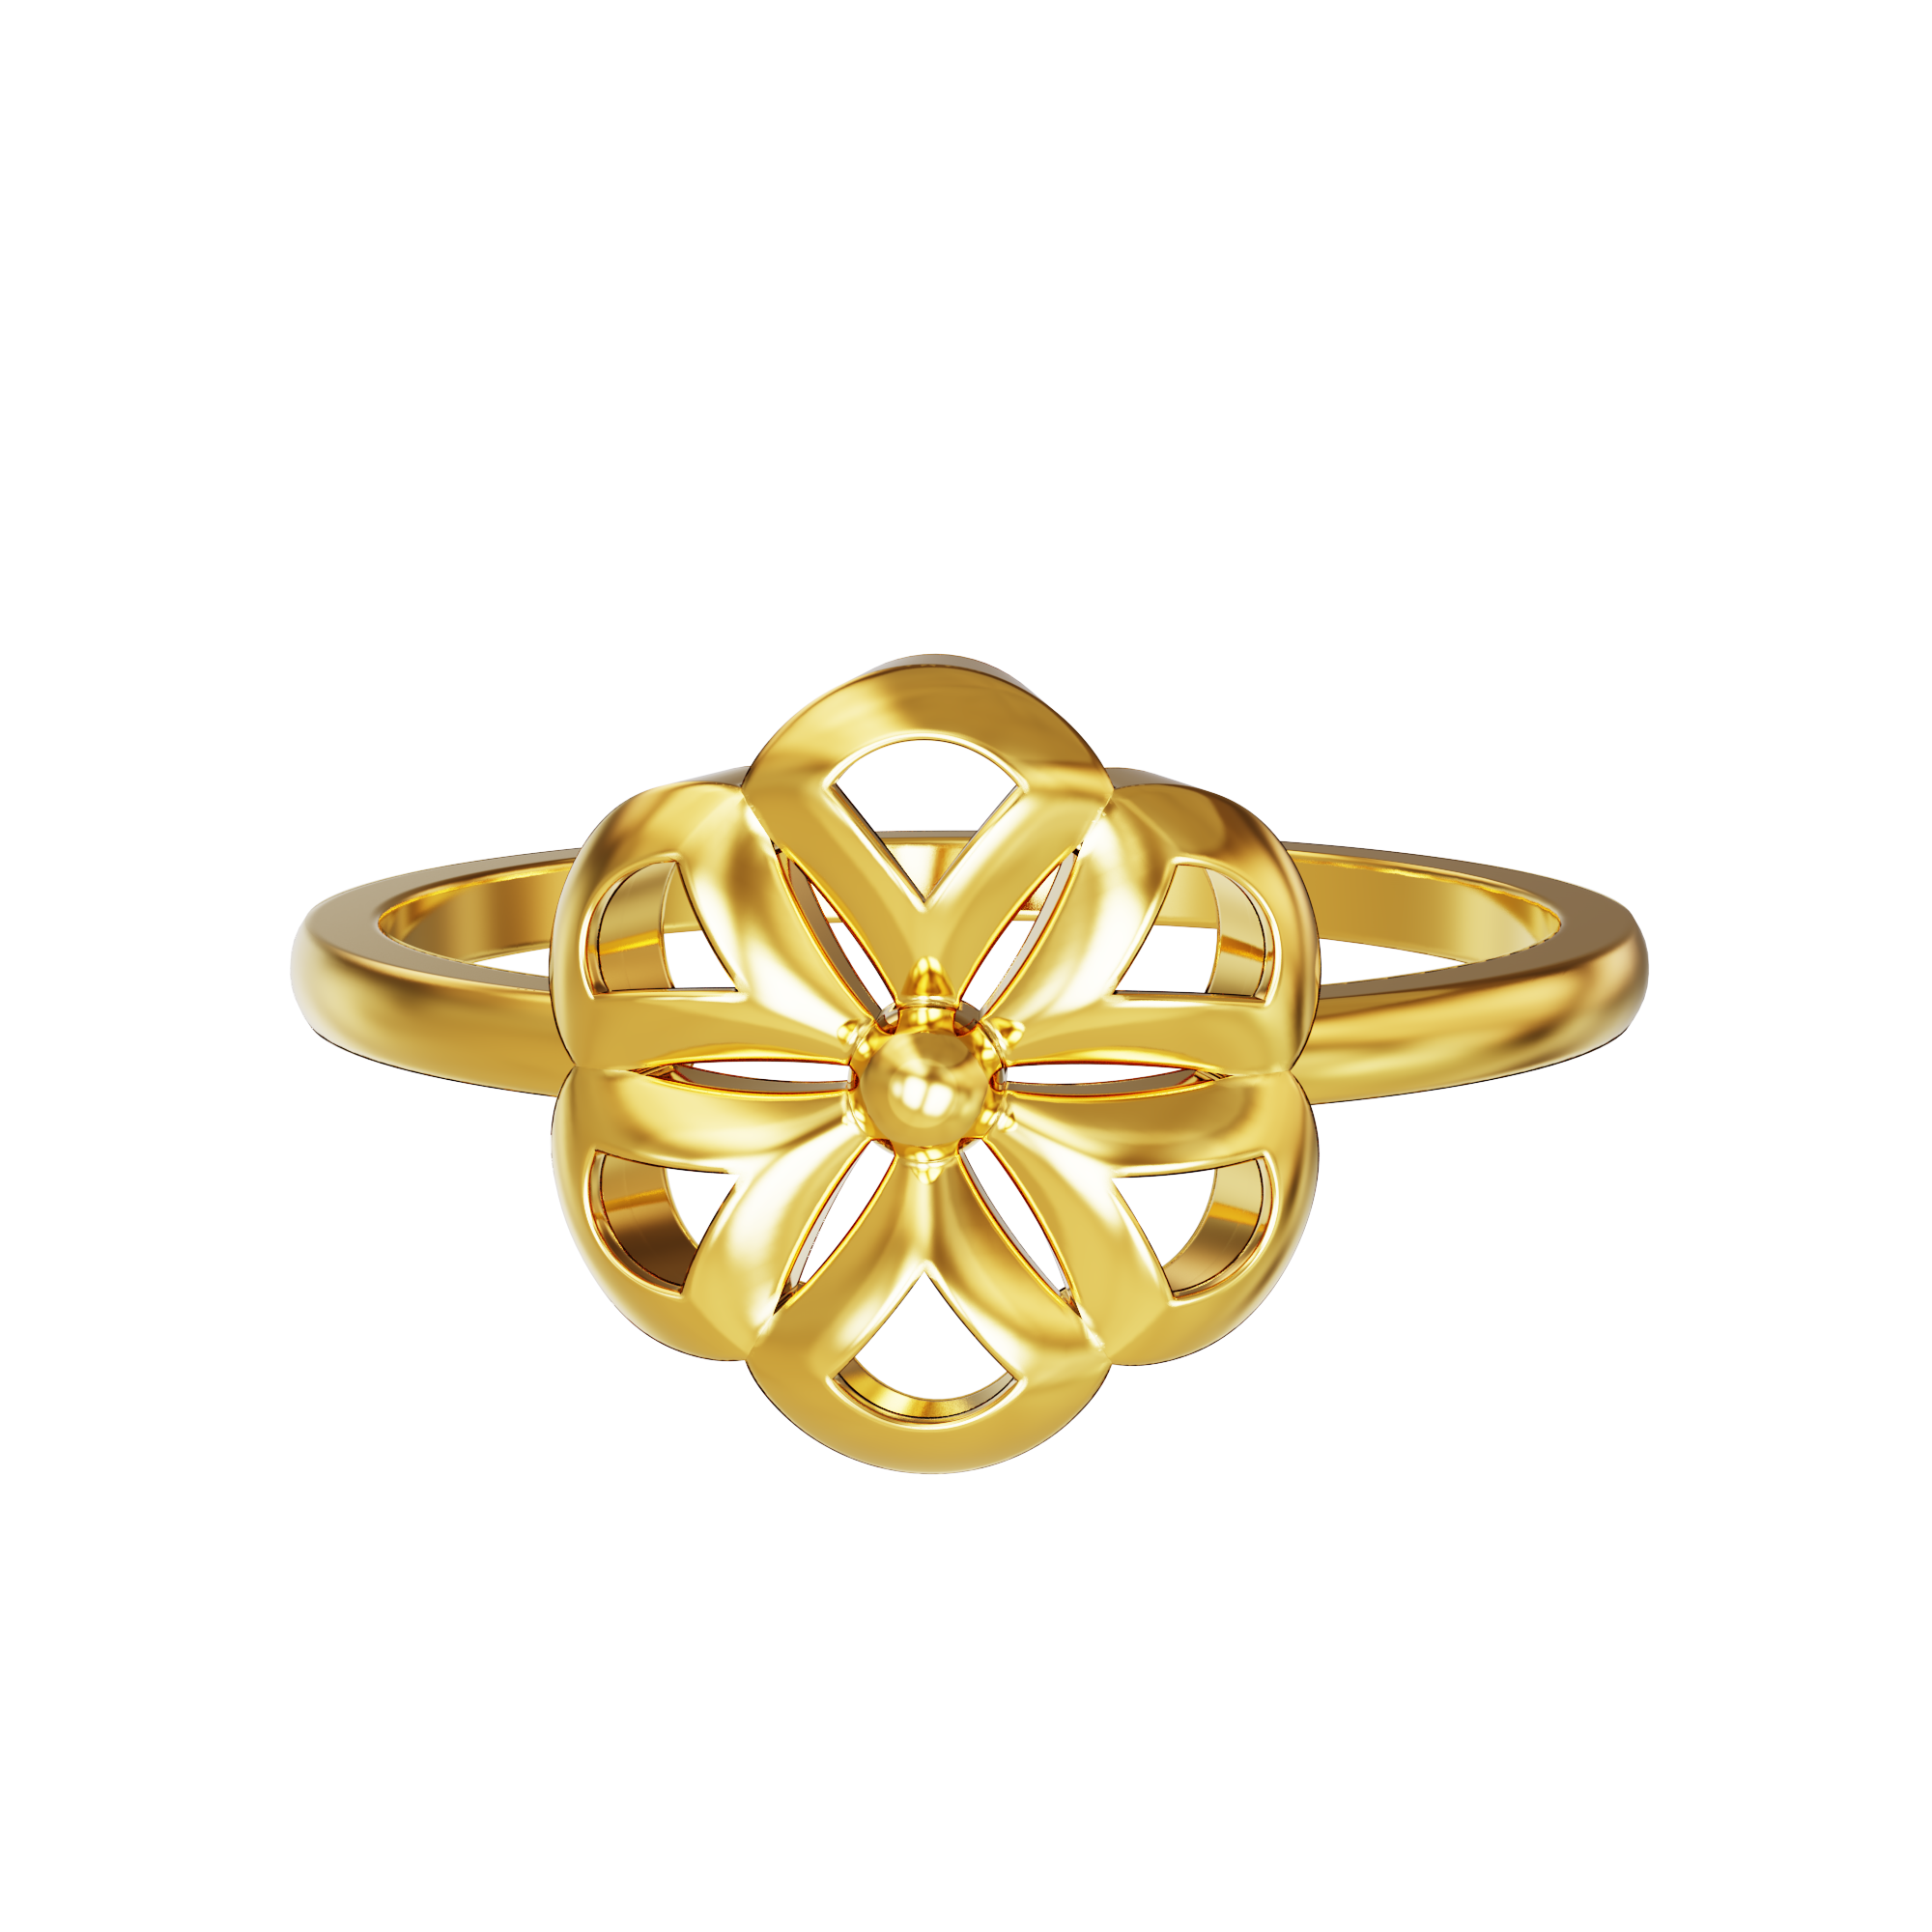 22k Solid Gold Ring Designs with Weight and Price @TheFashionPlus - YouTube